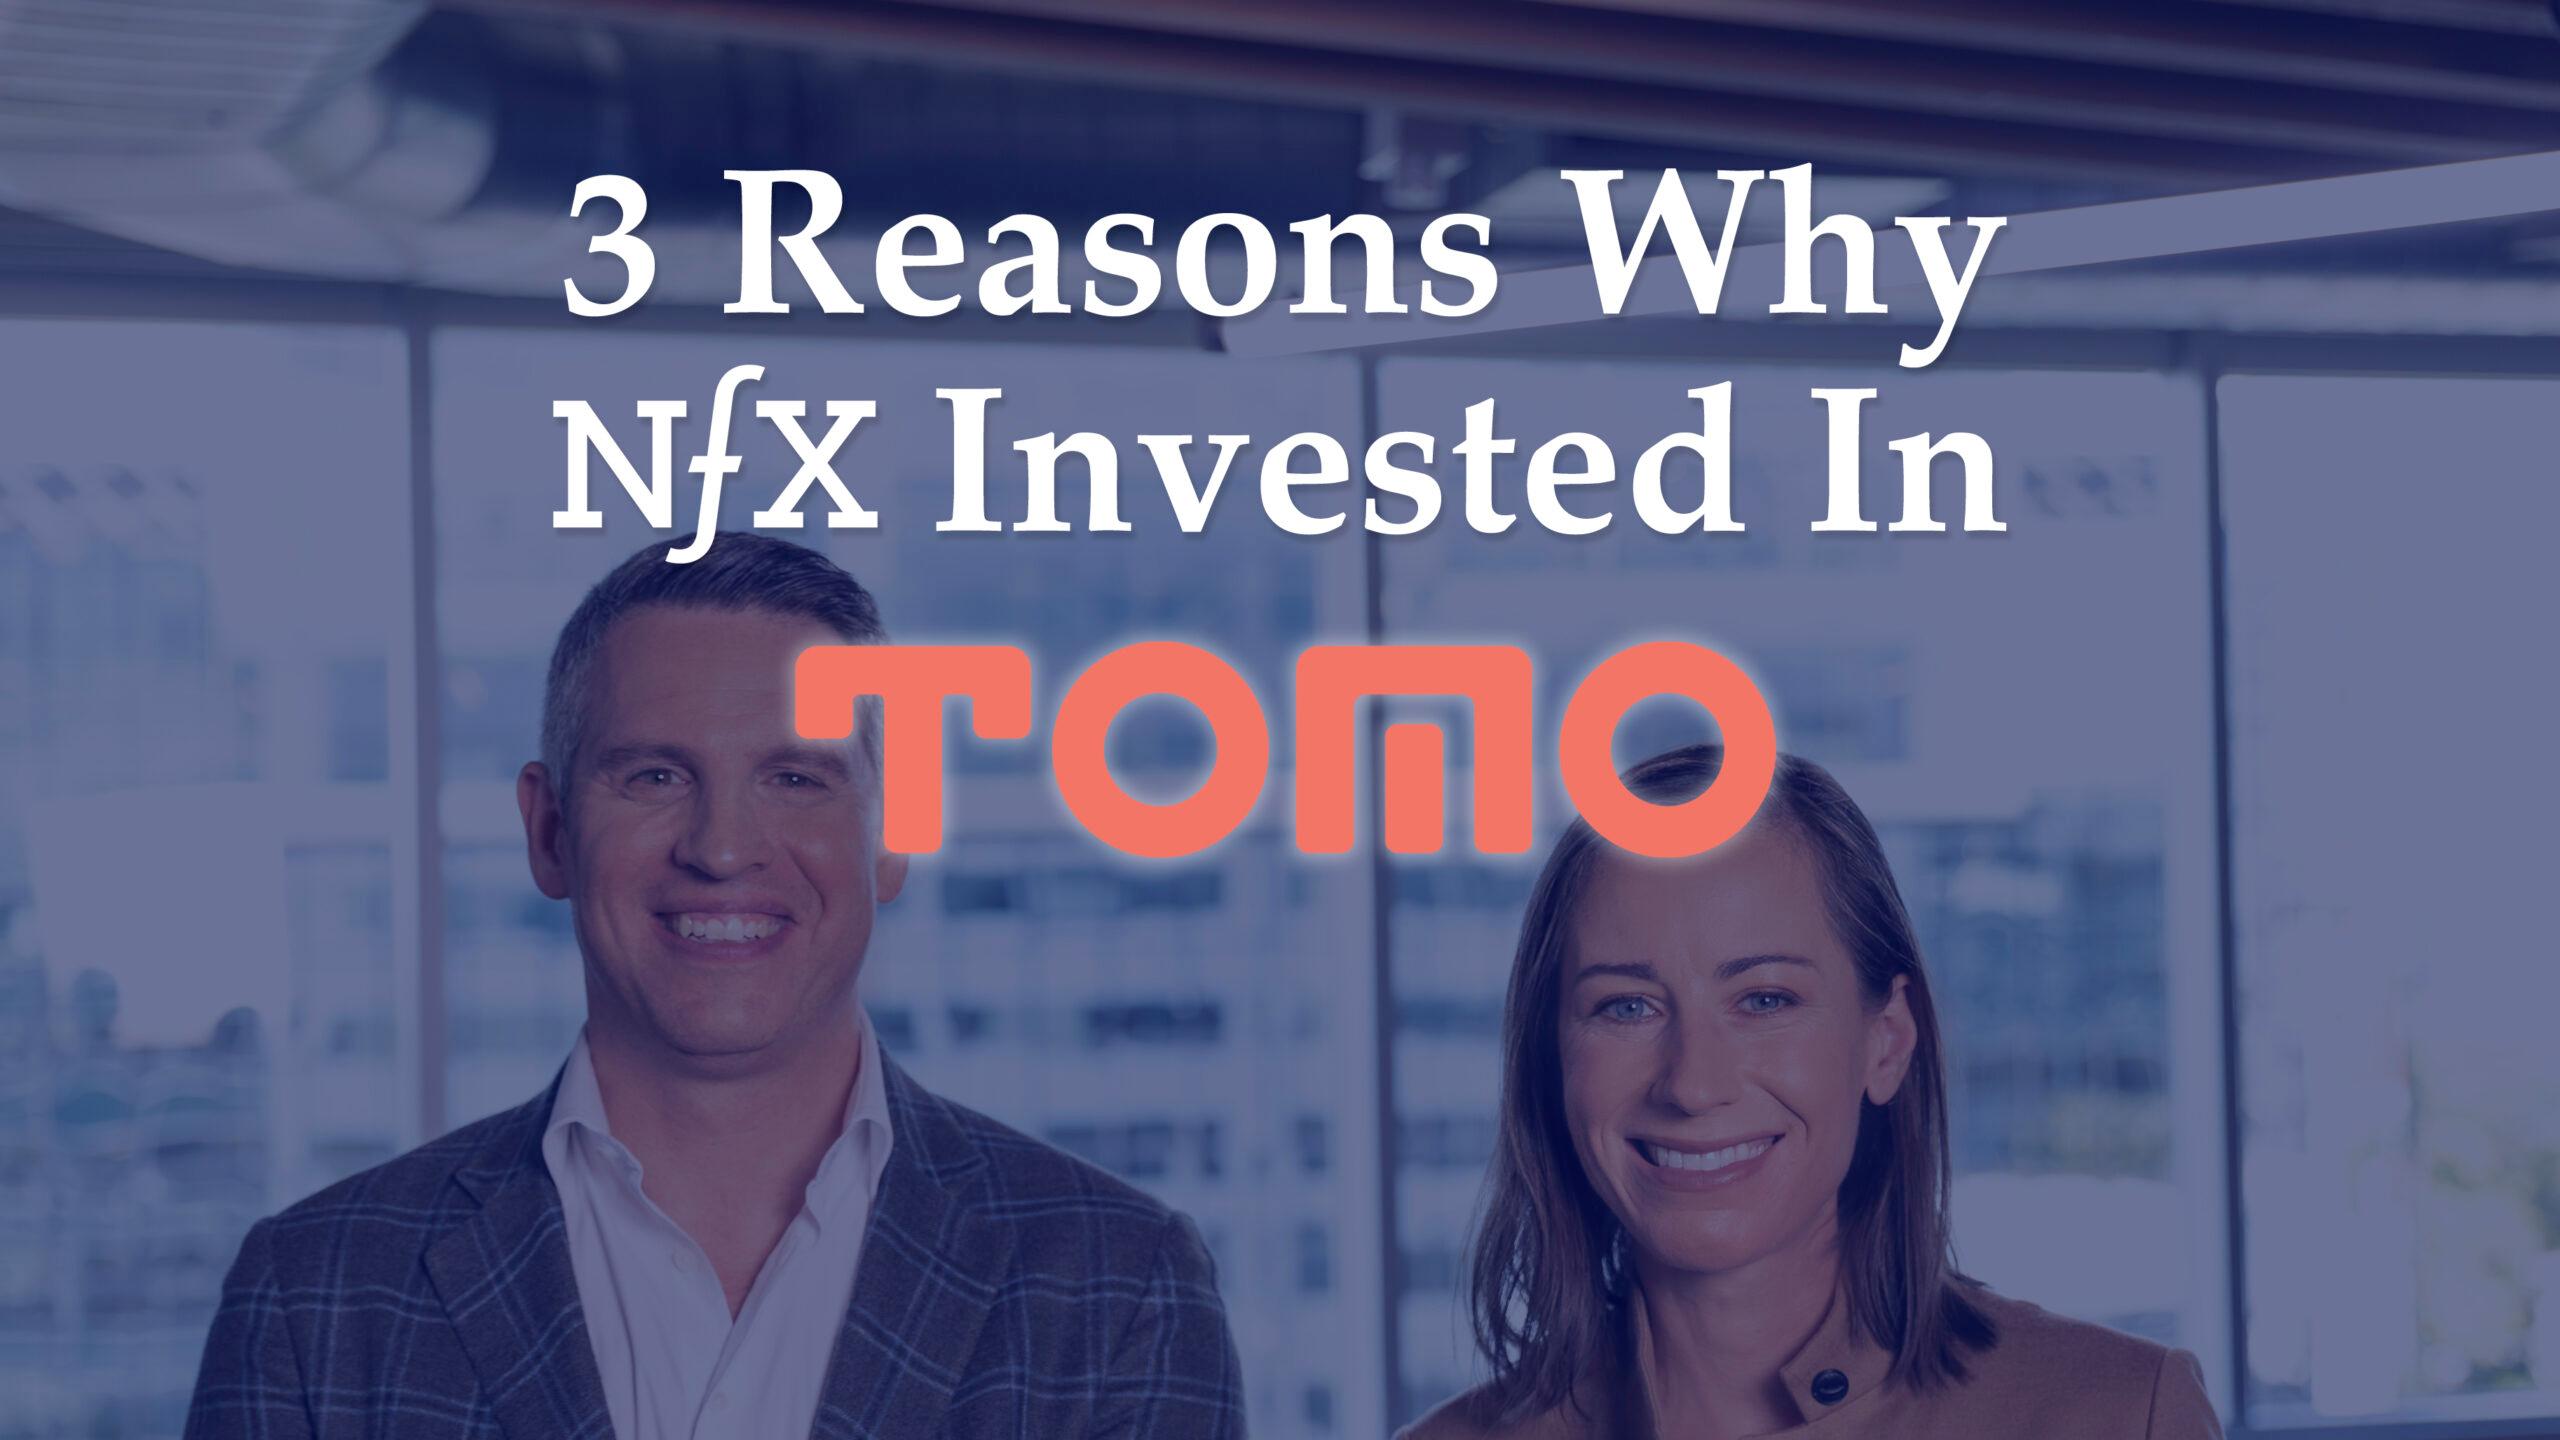 3 Reasons Why NFX Invested In Tomo